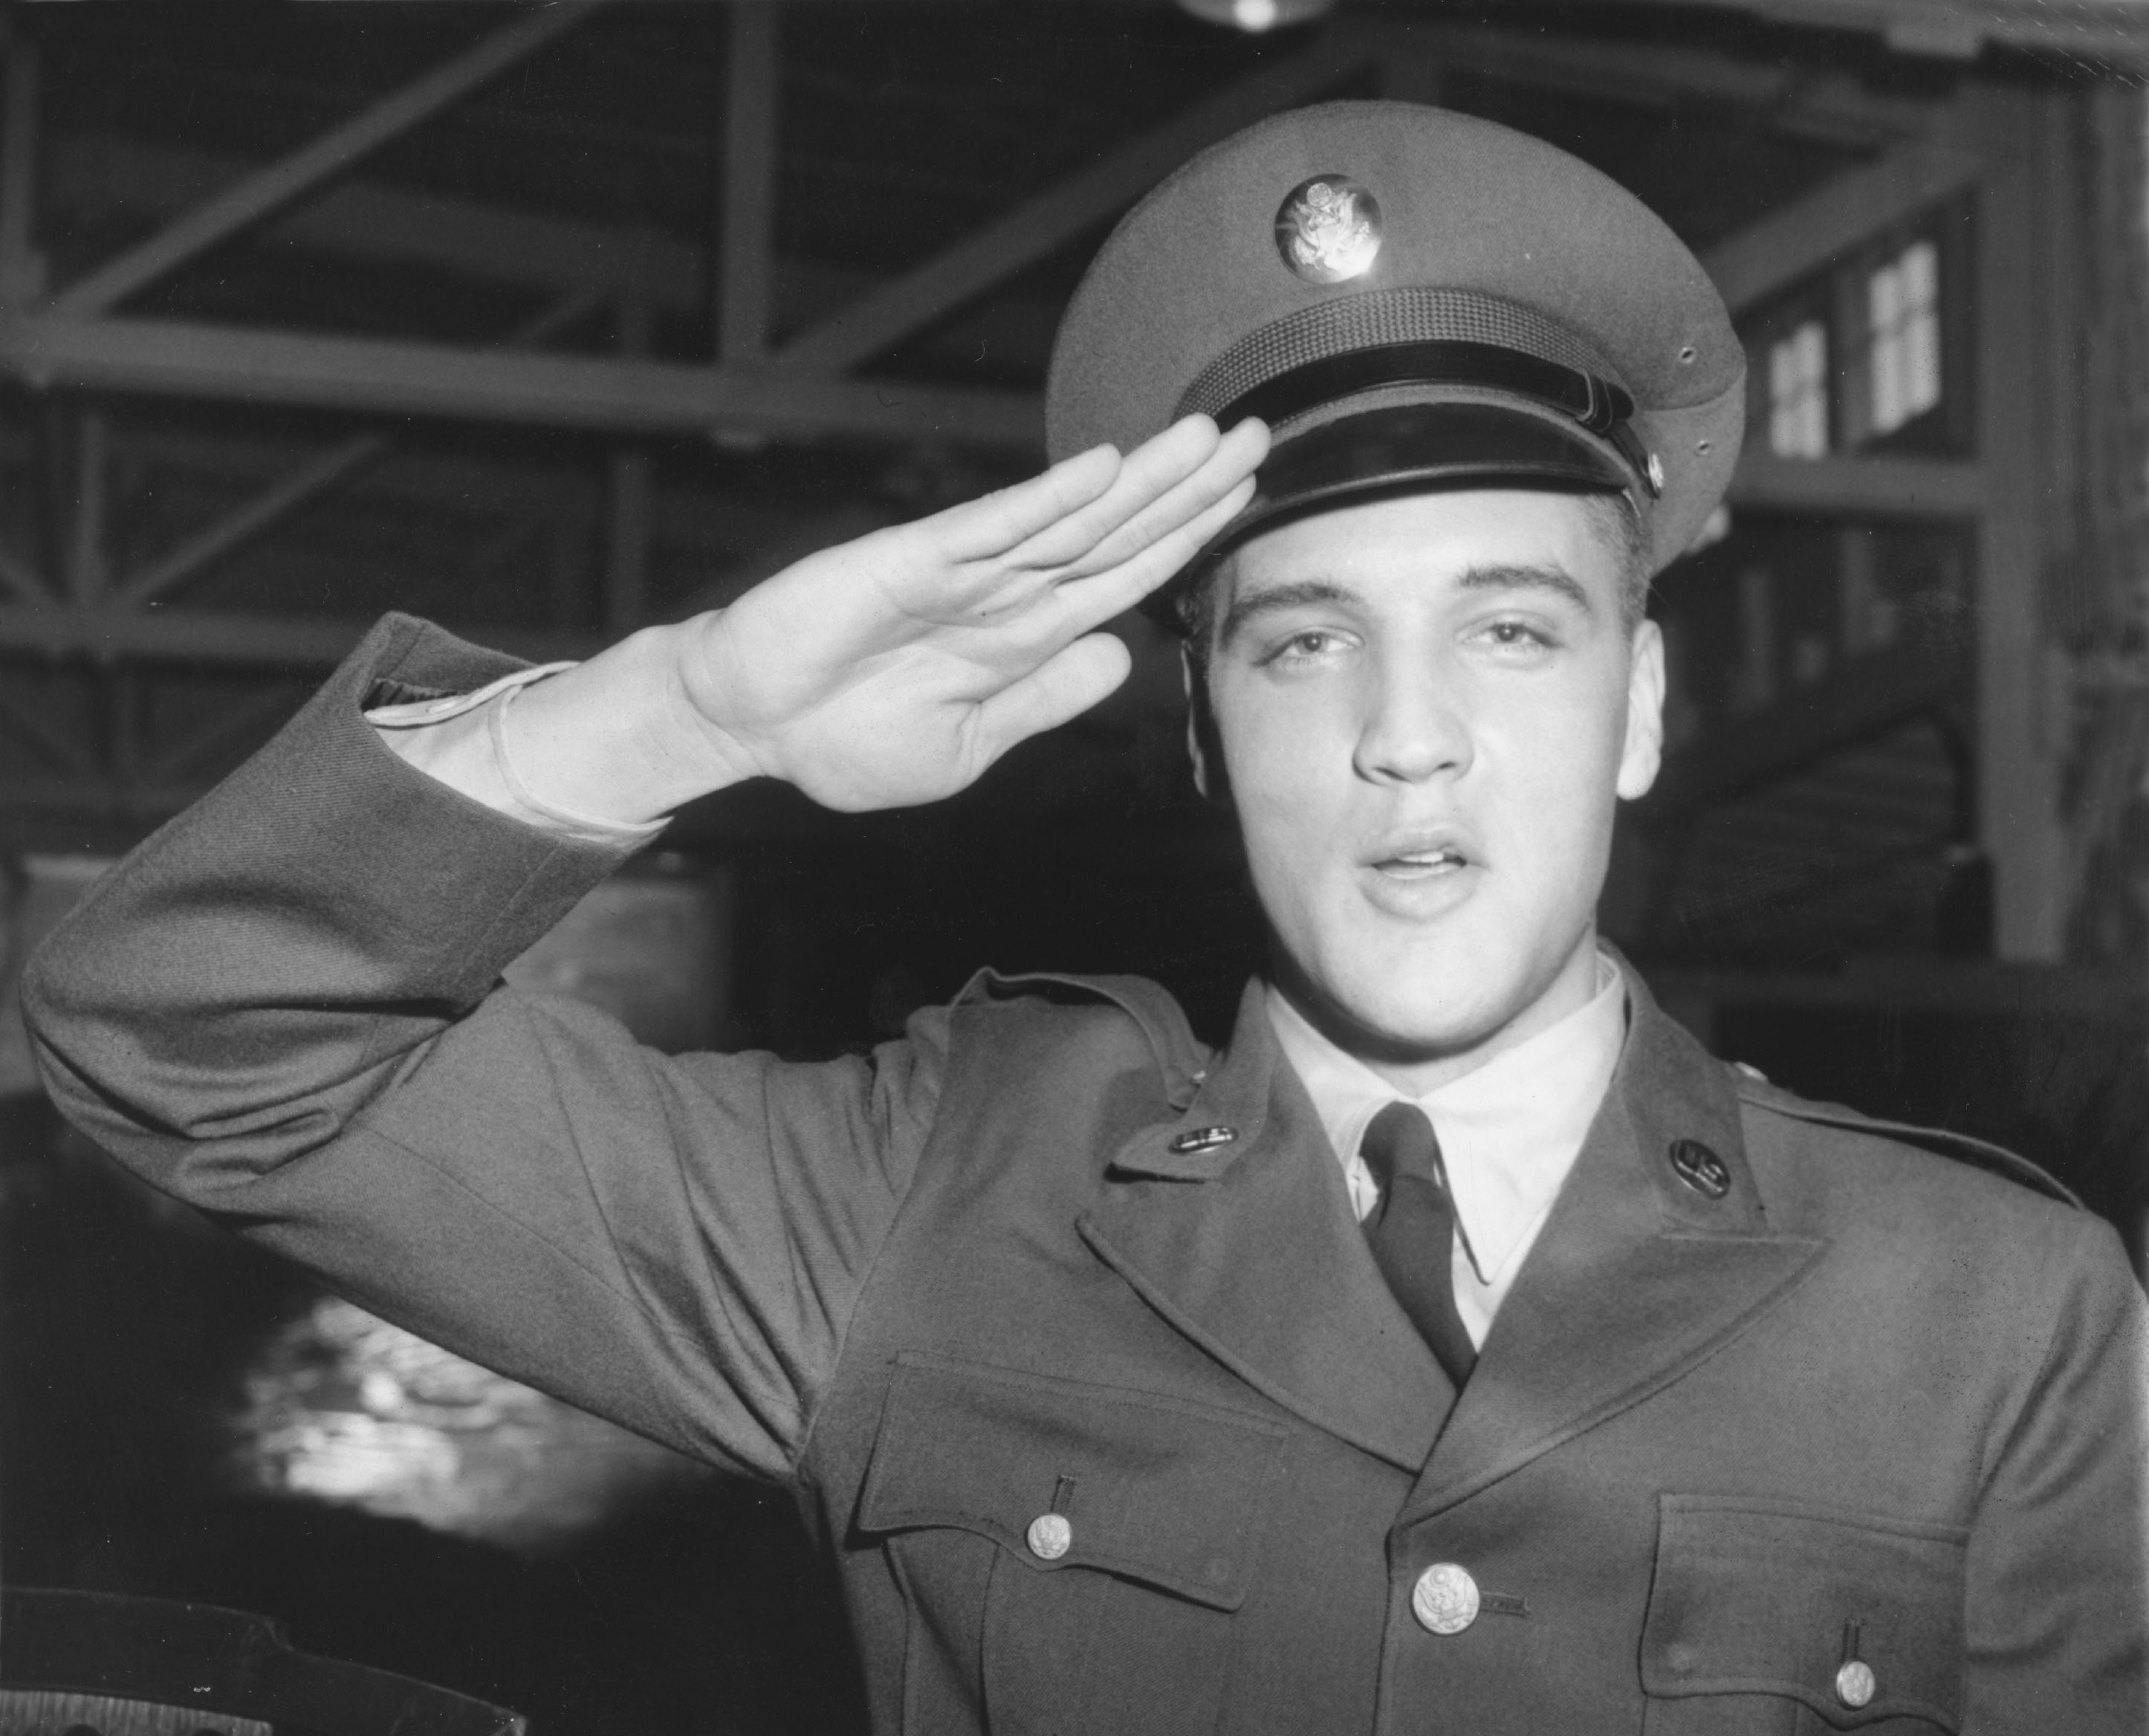 Close-up of the real Elvis in a military uniform giving a salute